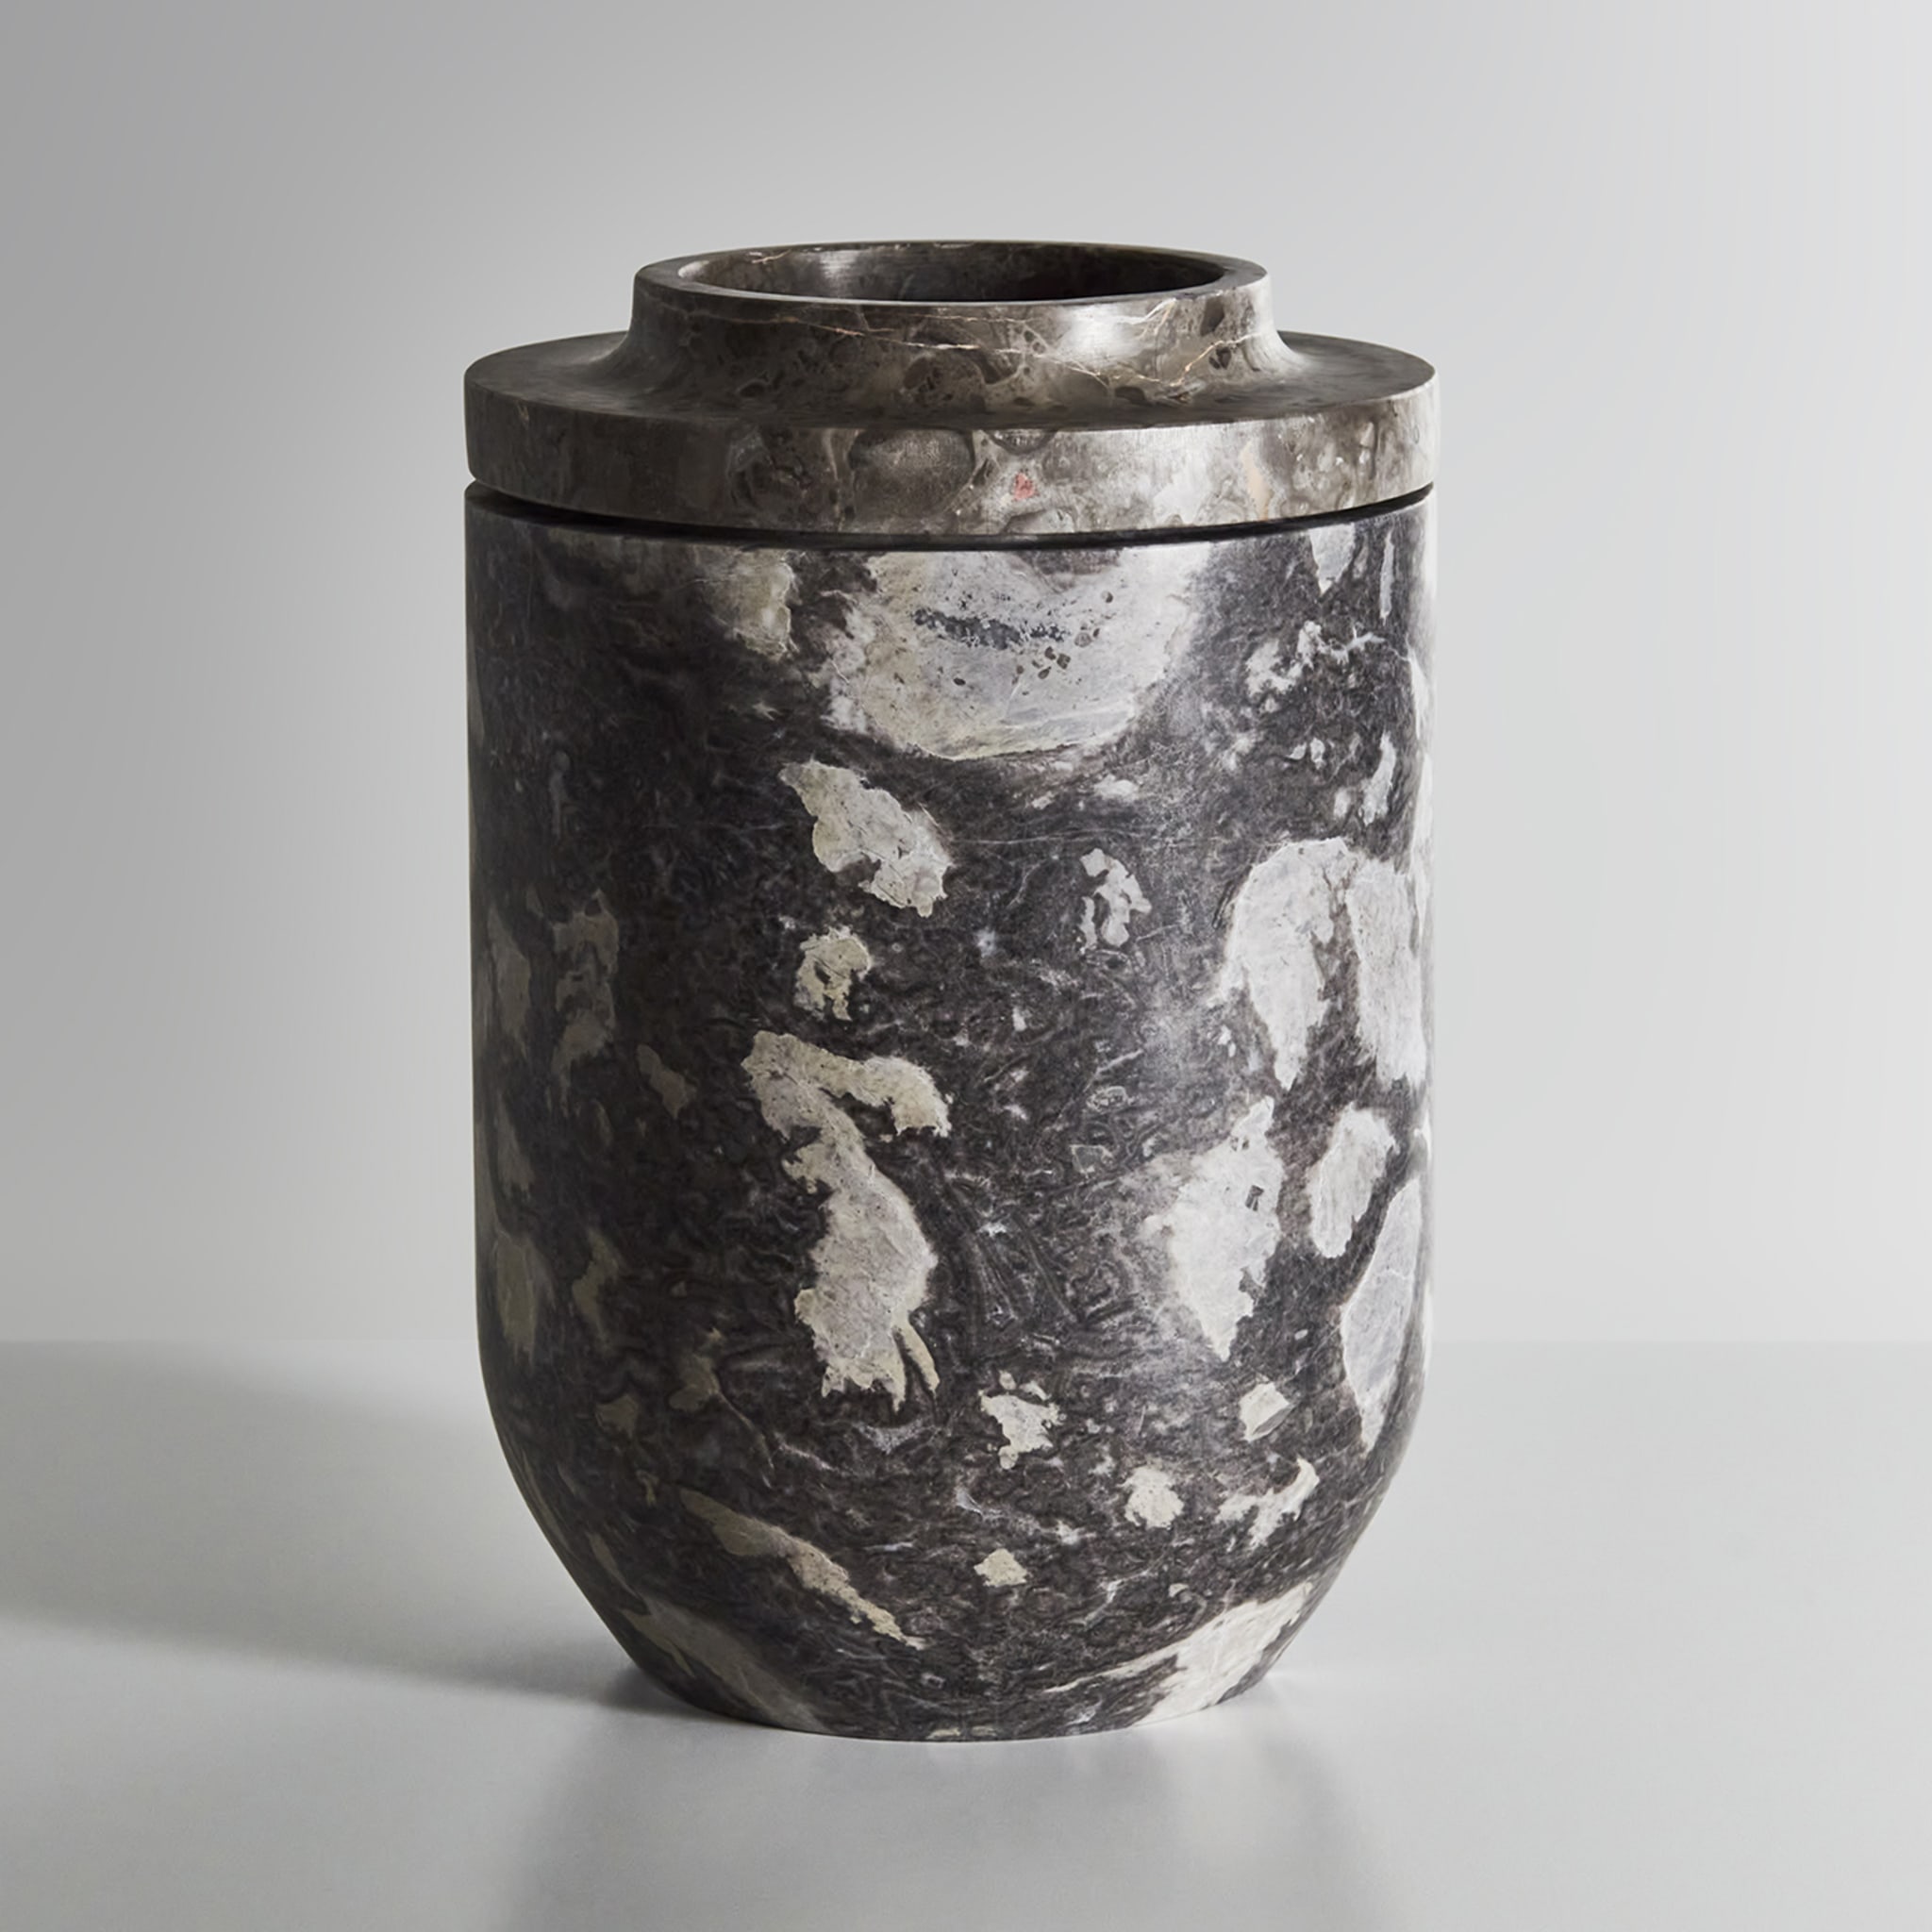 Royal Small Gray Vase by Christophe Pillet - Alternative view 3